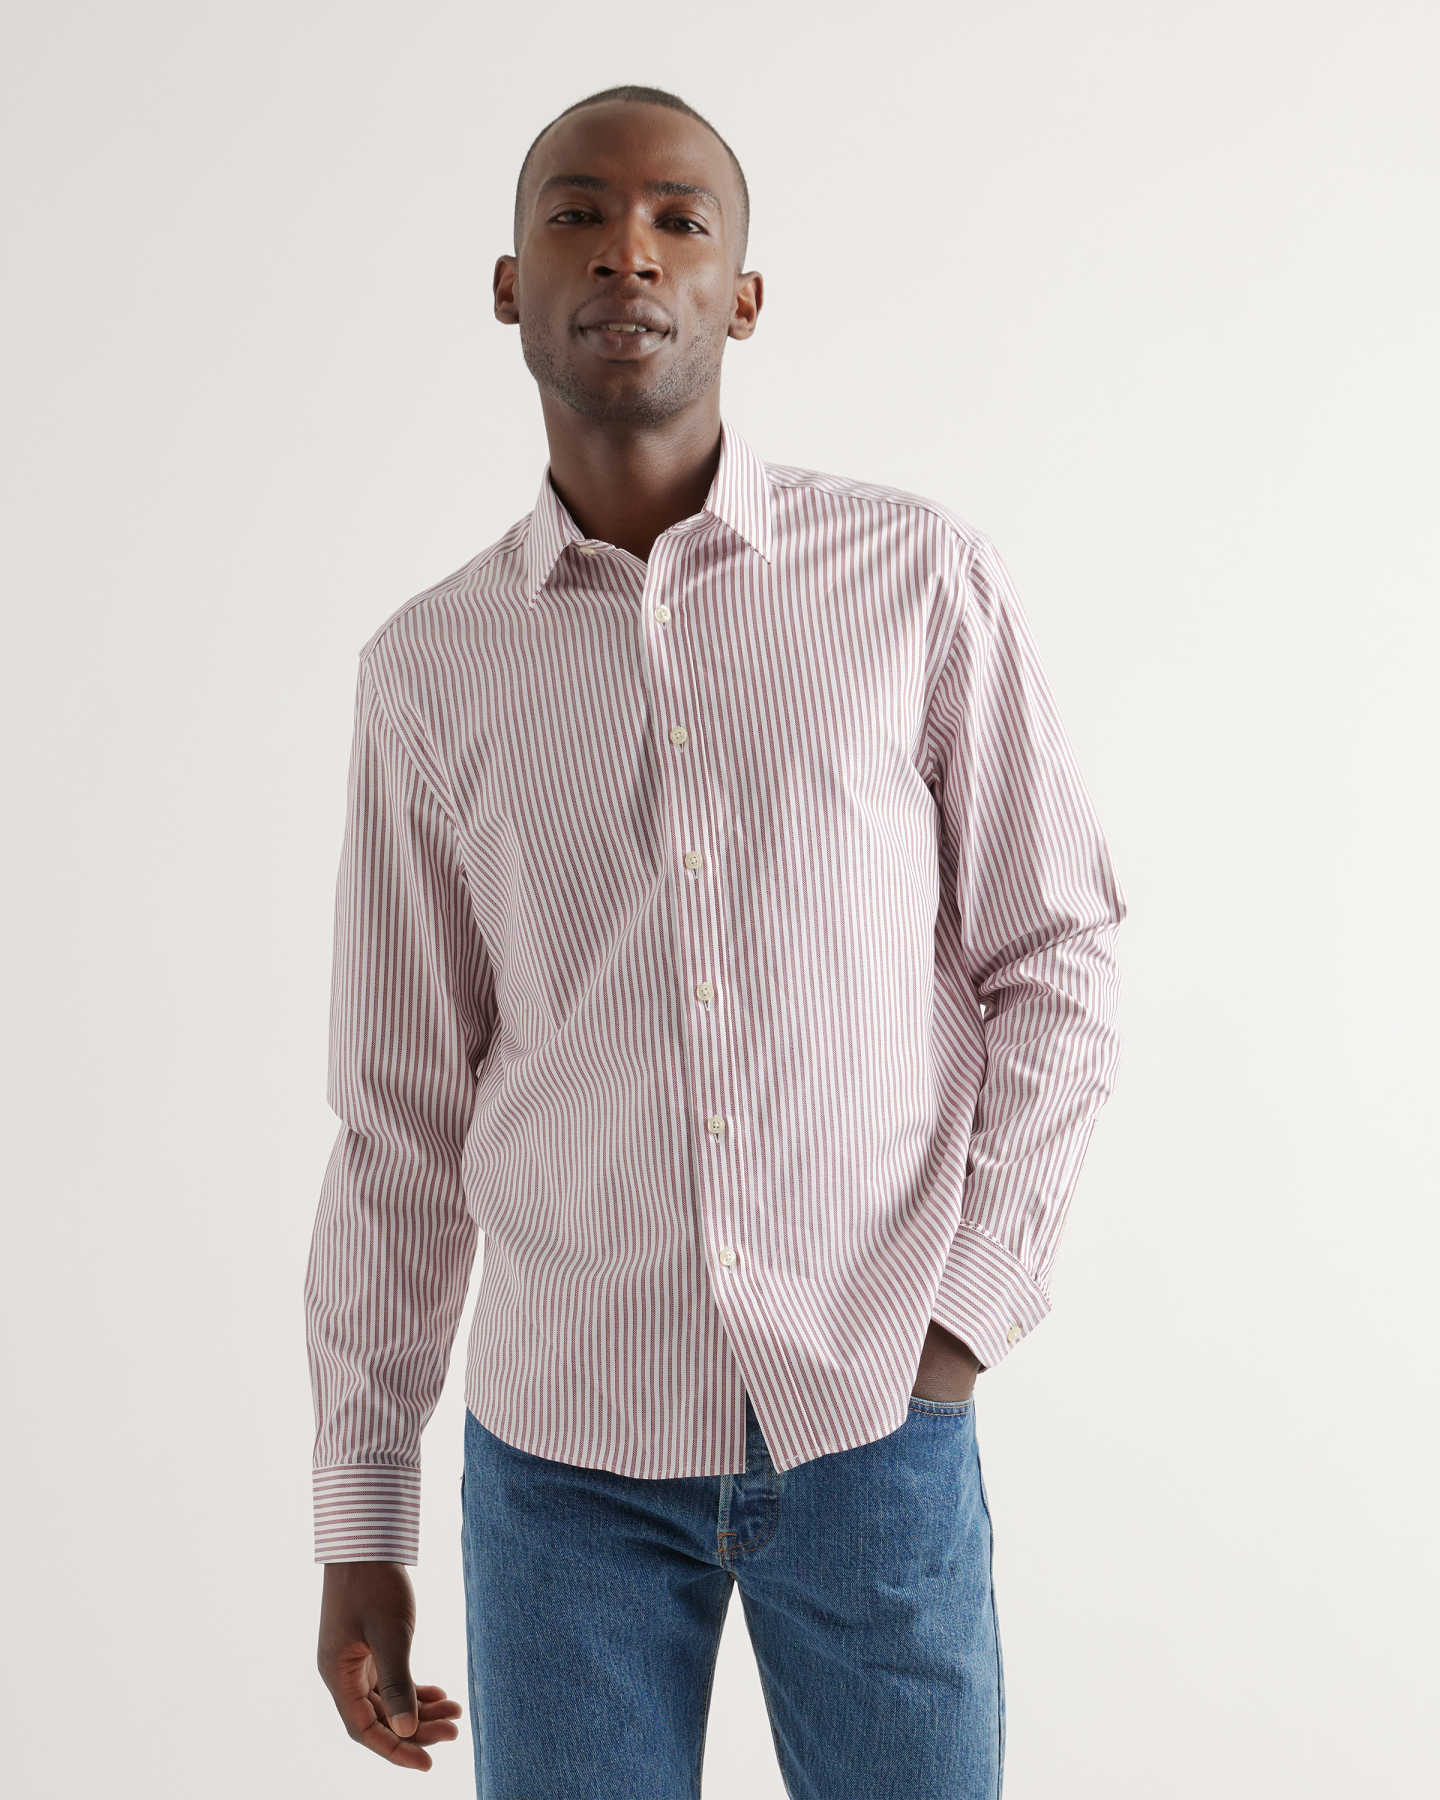 The Untucked Dress Shirt - Maroon Stripes